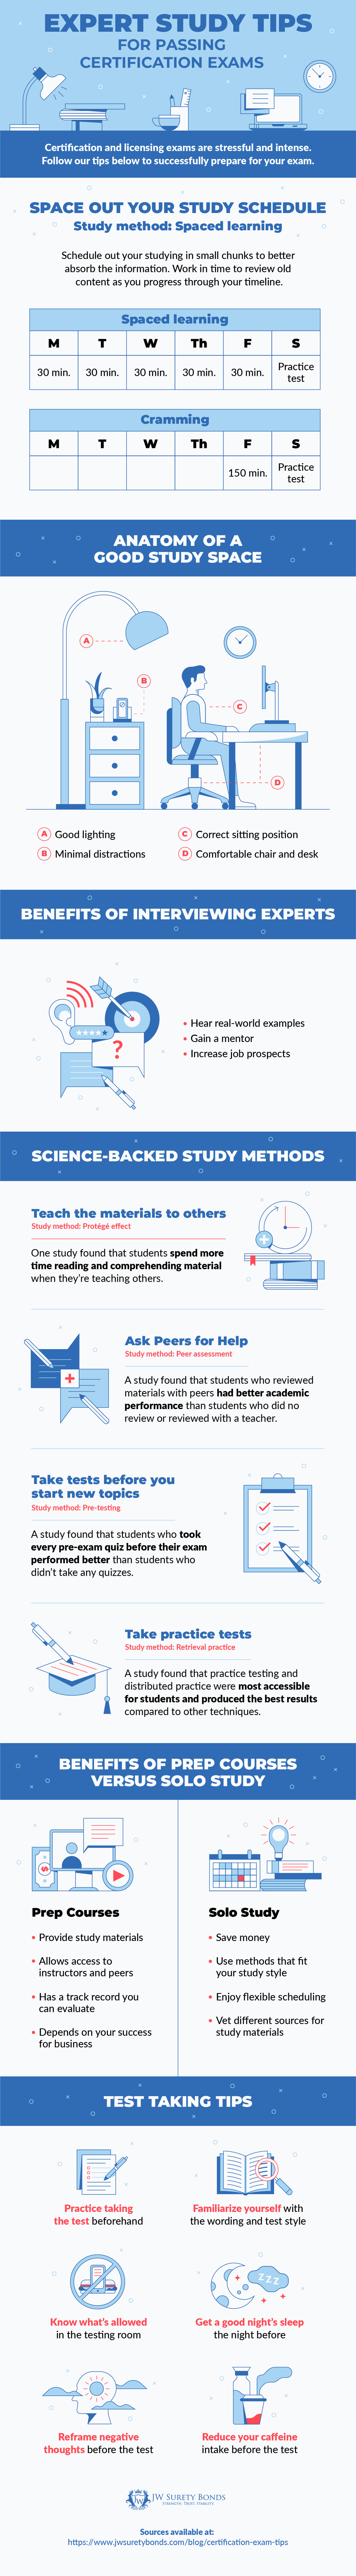 expert study tips to pass certification exams infographic